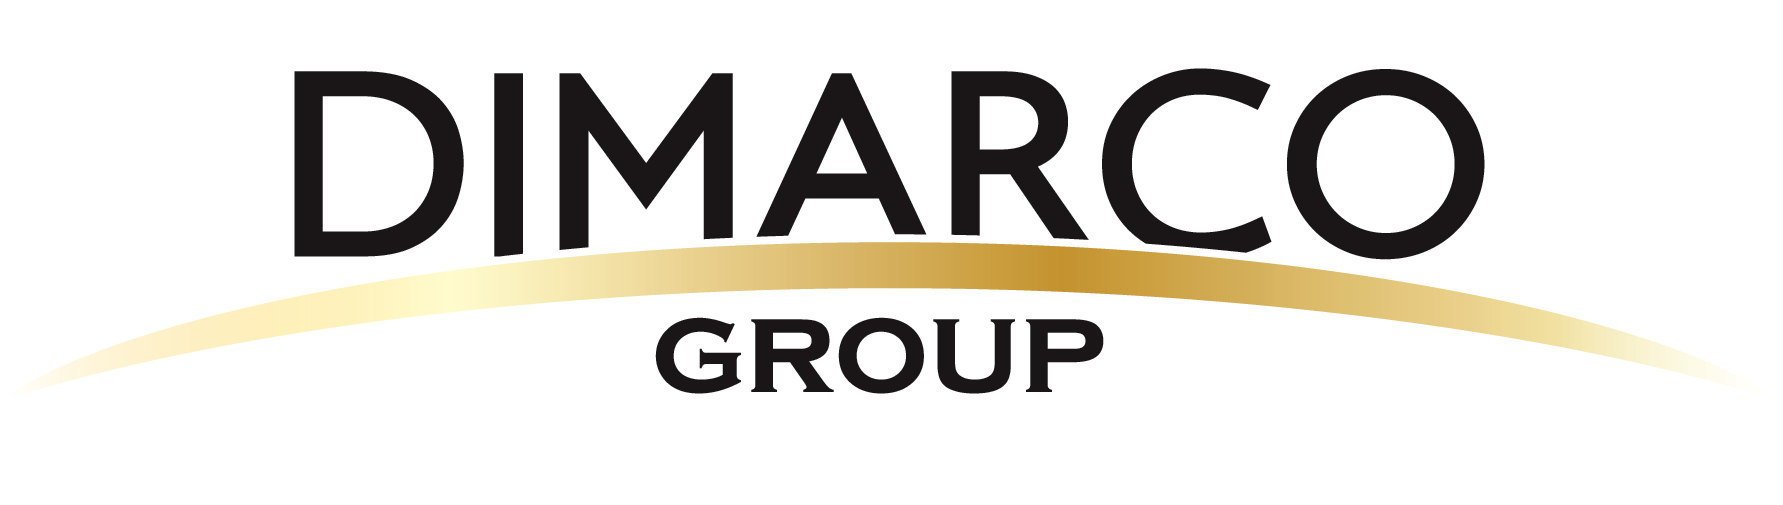 Dimarco Group